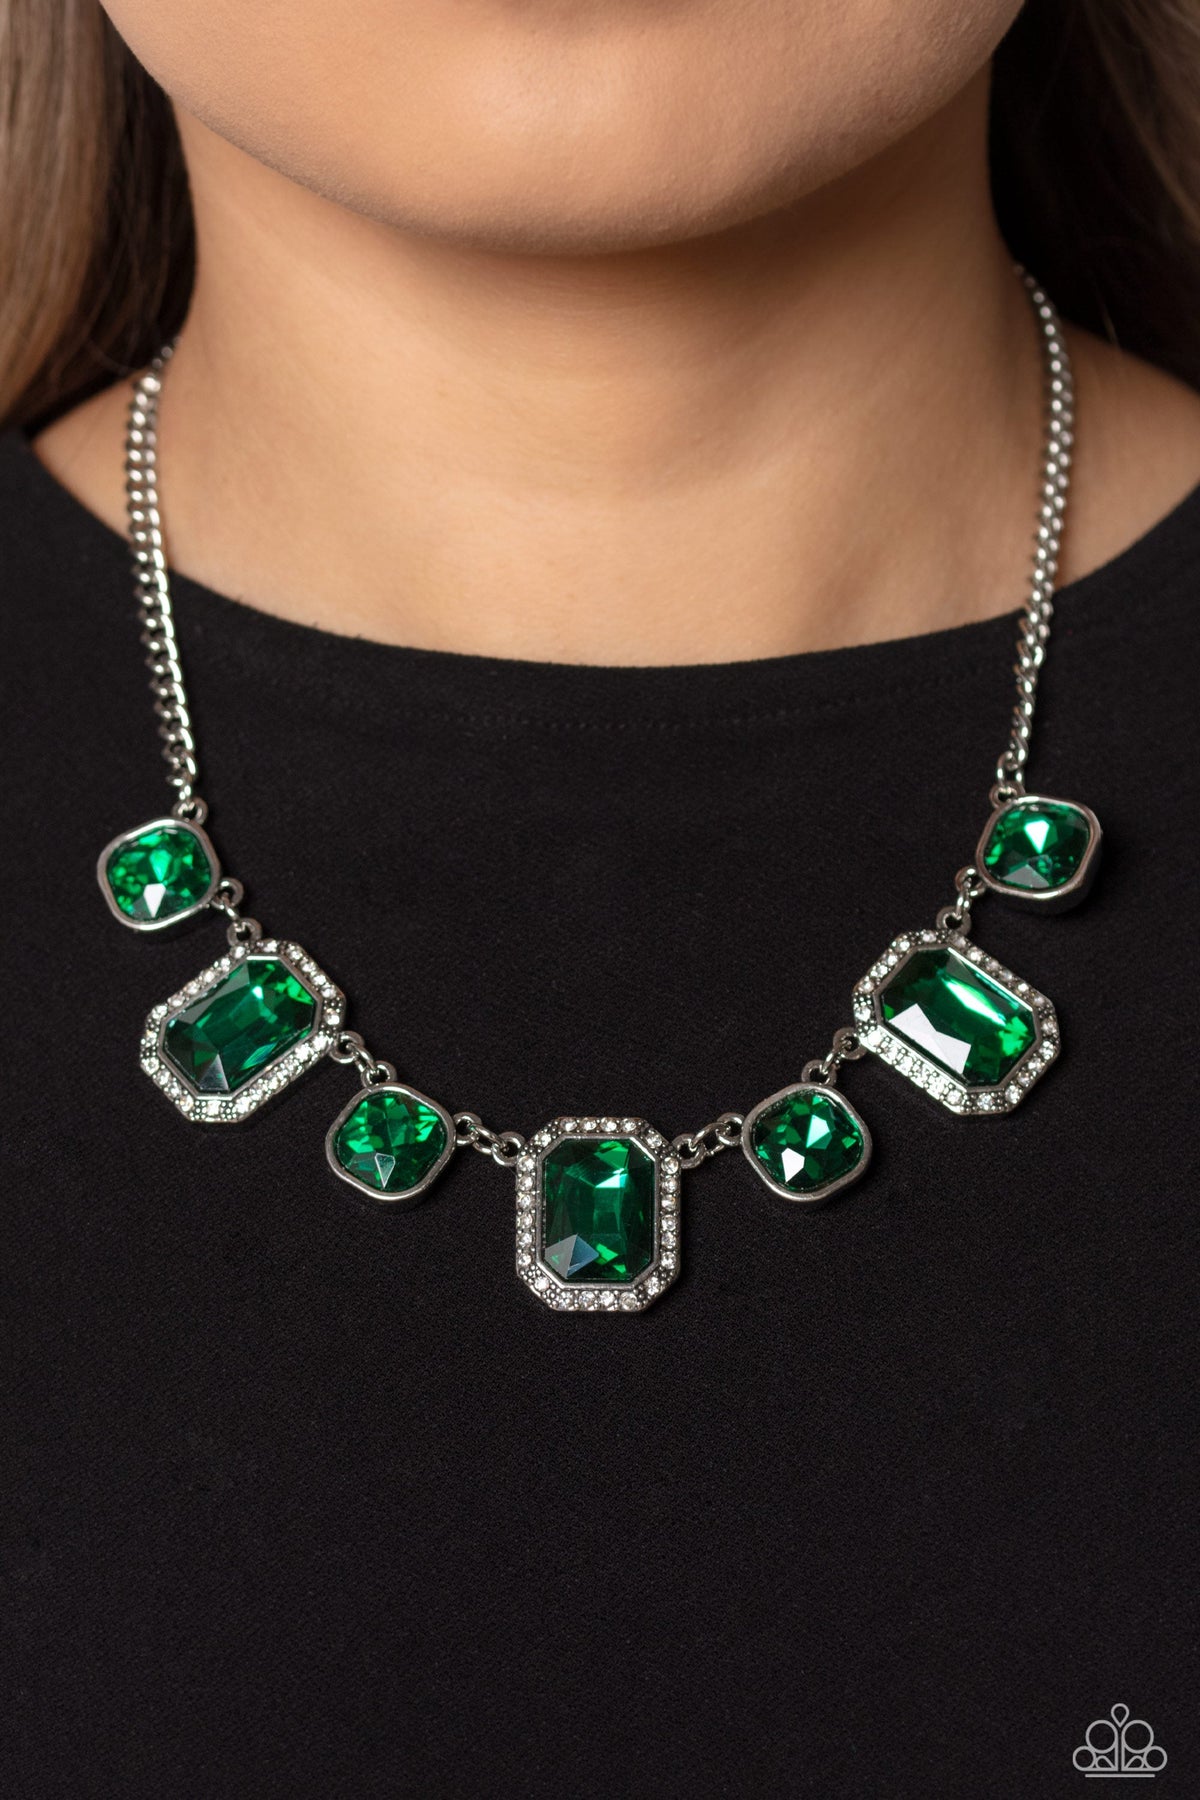 Royal Rumble Green Rhinestone Necklace - Paparazzi Accessories-on model - CarasShop.com - $5 Jewelry by Cara Jewels